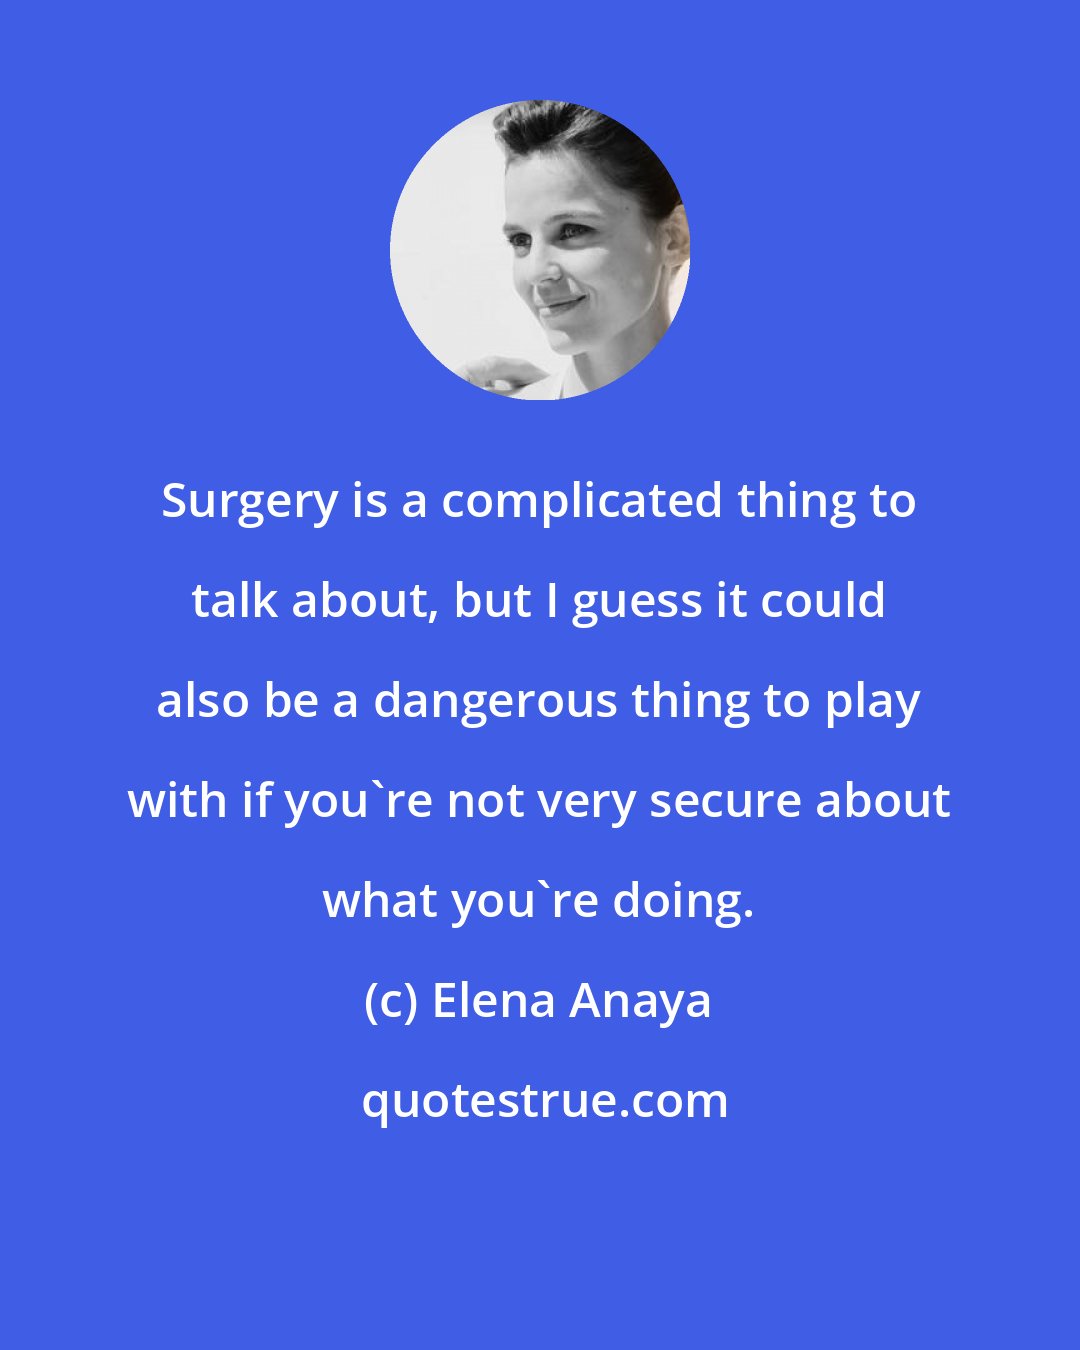 Elena Anaya: Surgery is a complicated thing to talk about, but I guess it could also be a dangerous thing to play with if you're not very secure about what you're doing.